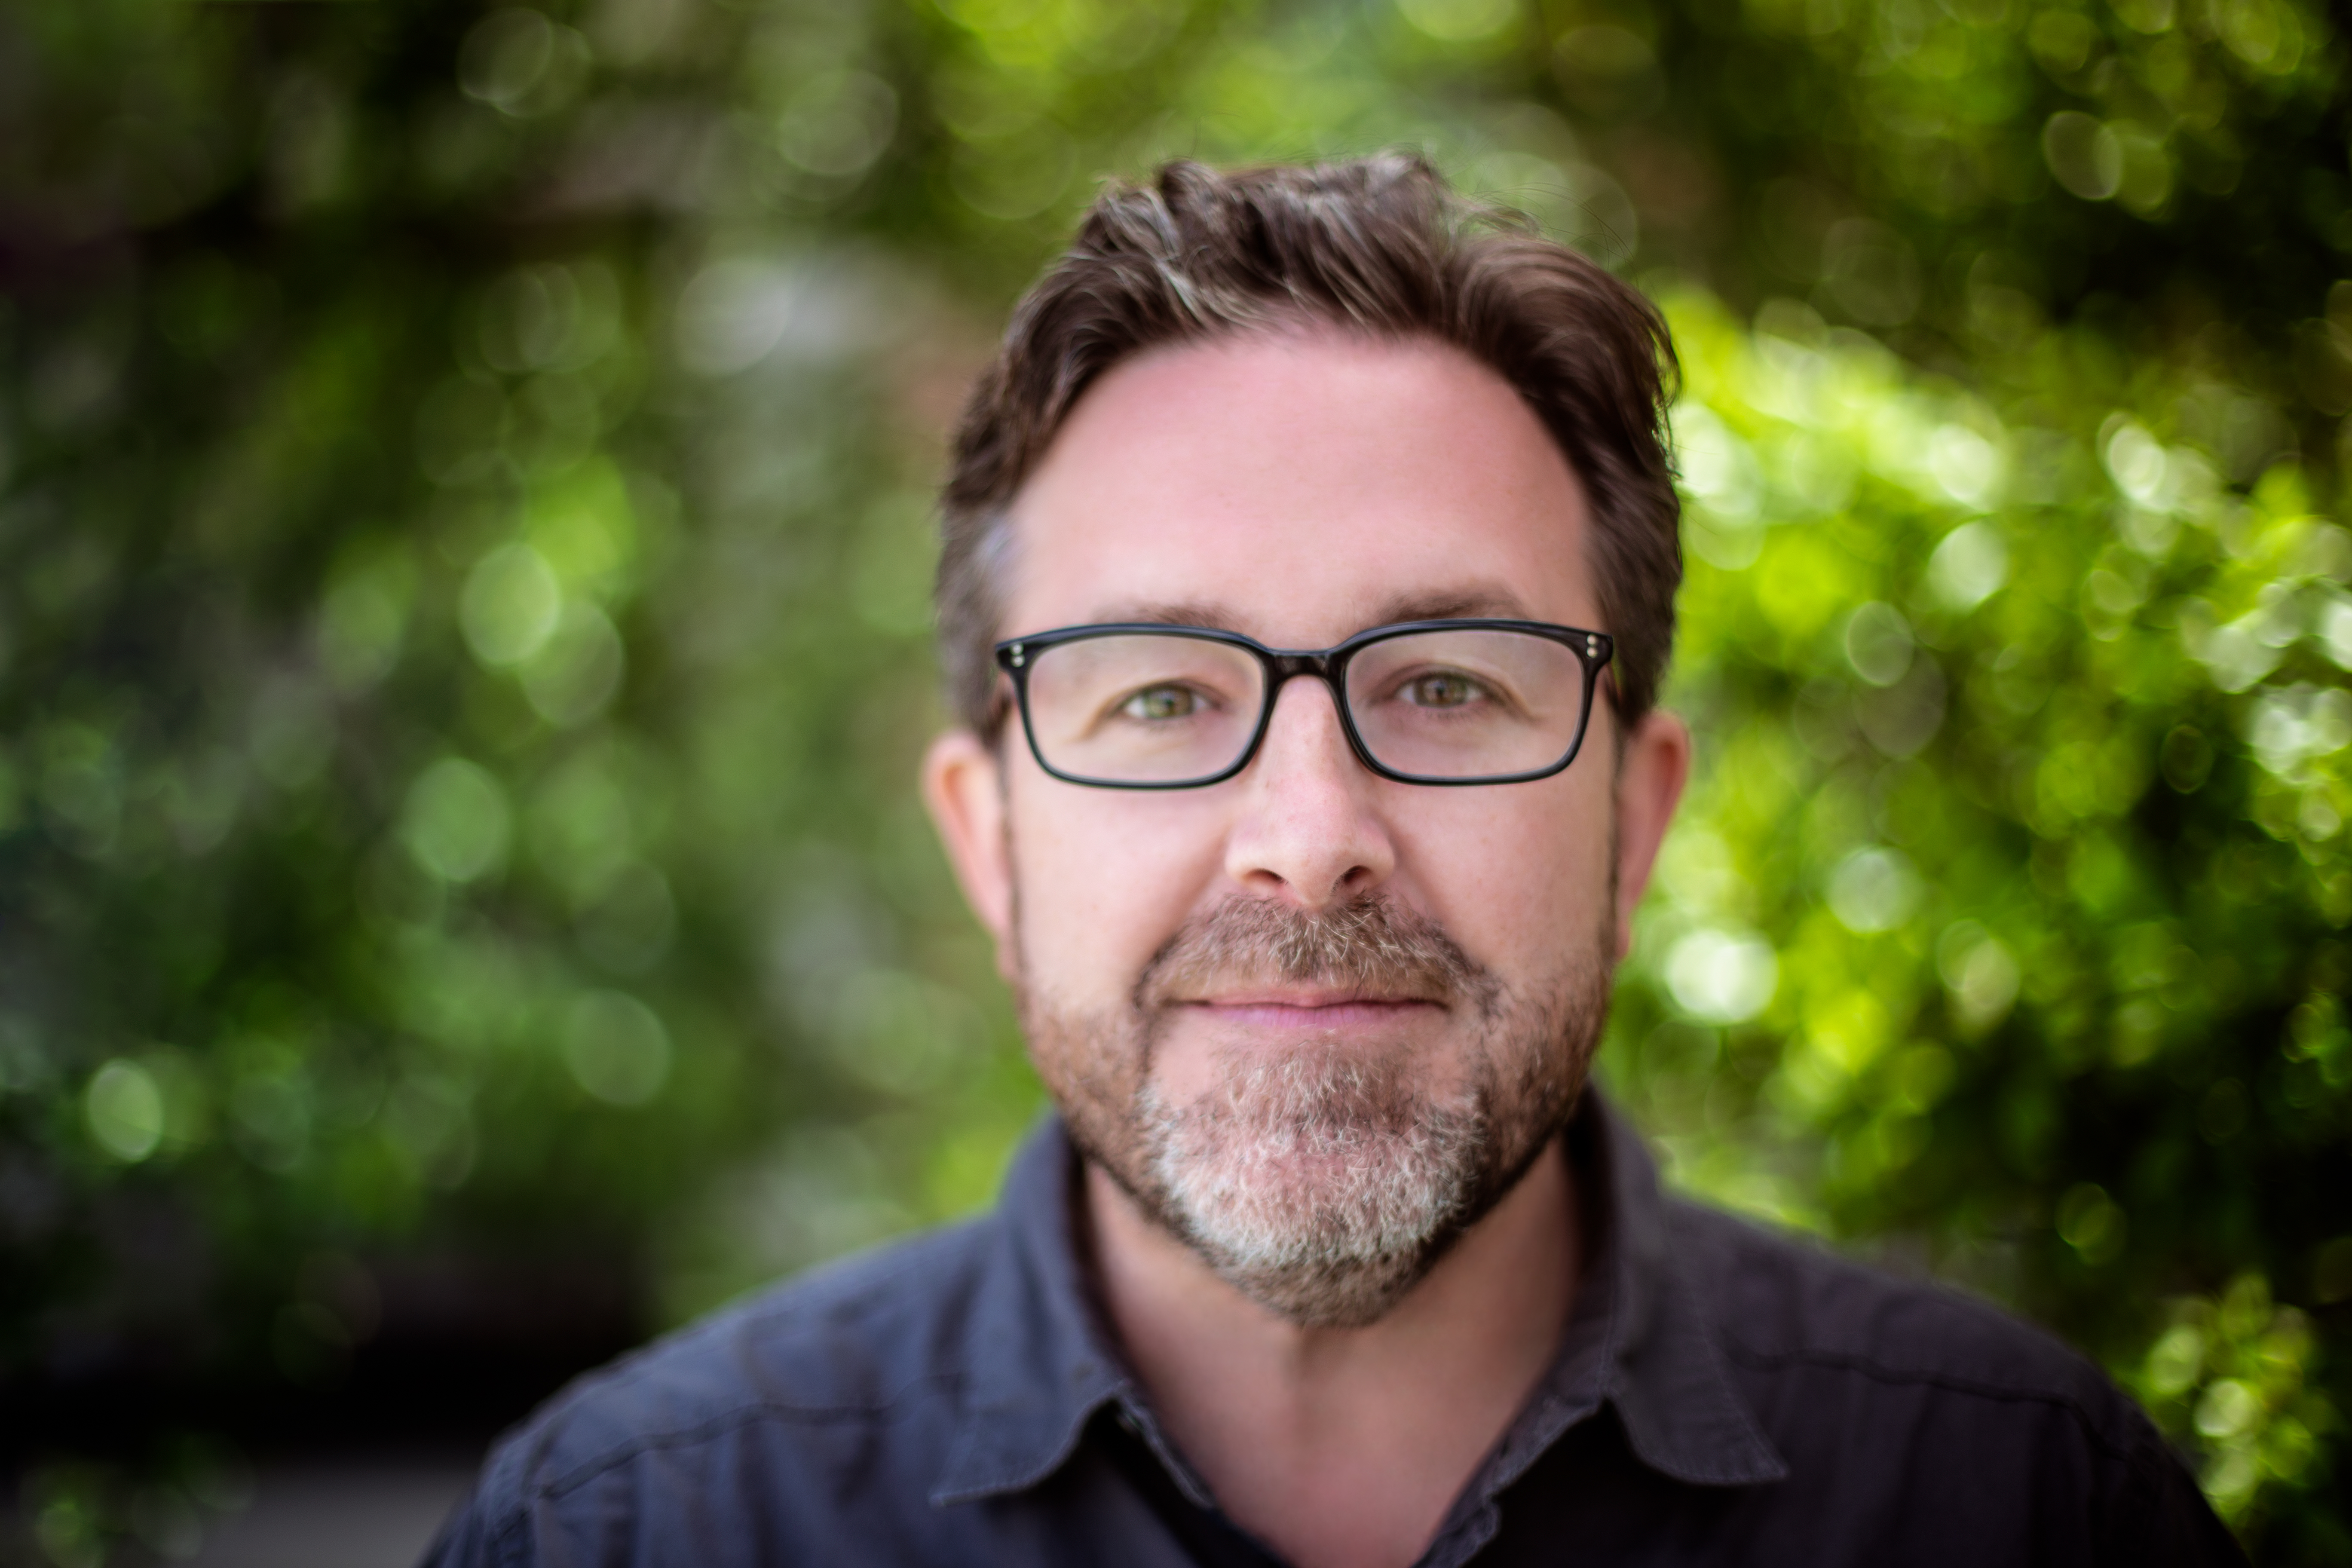 <div><h1>Tim Cawley</h1>
<h3>Founder, Chief Creative Officer</h3></div>